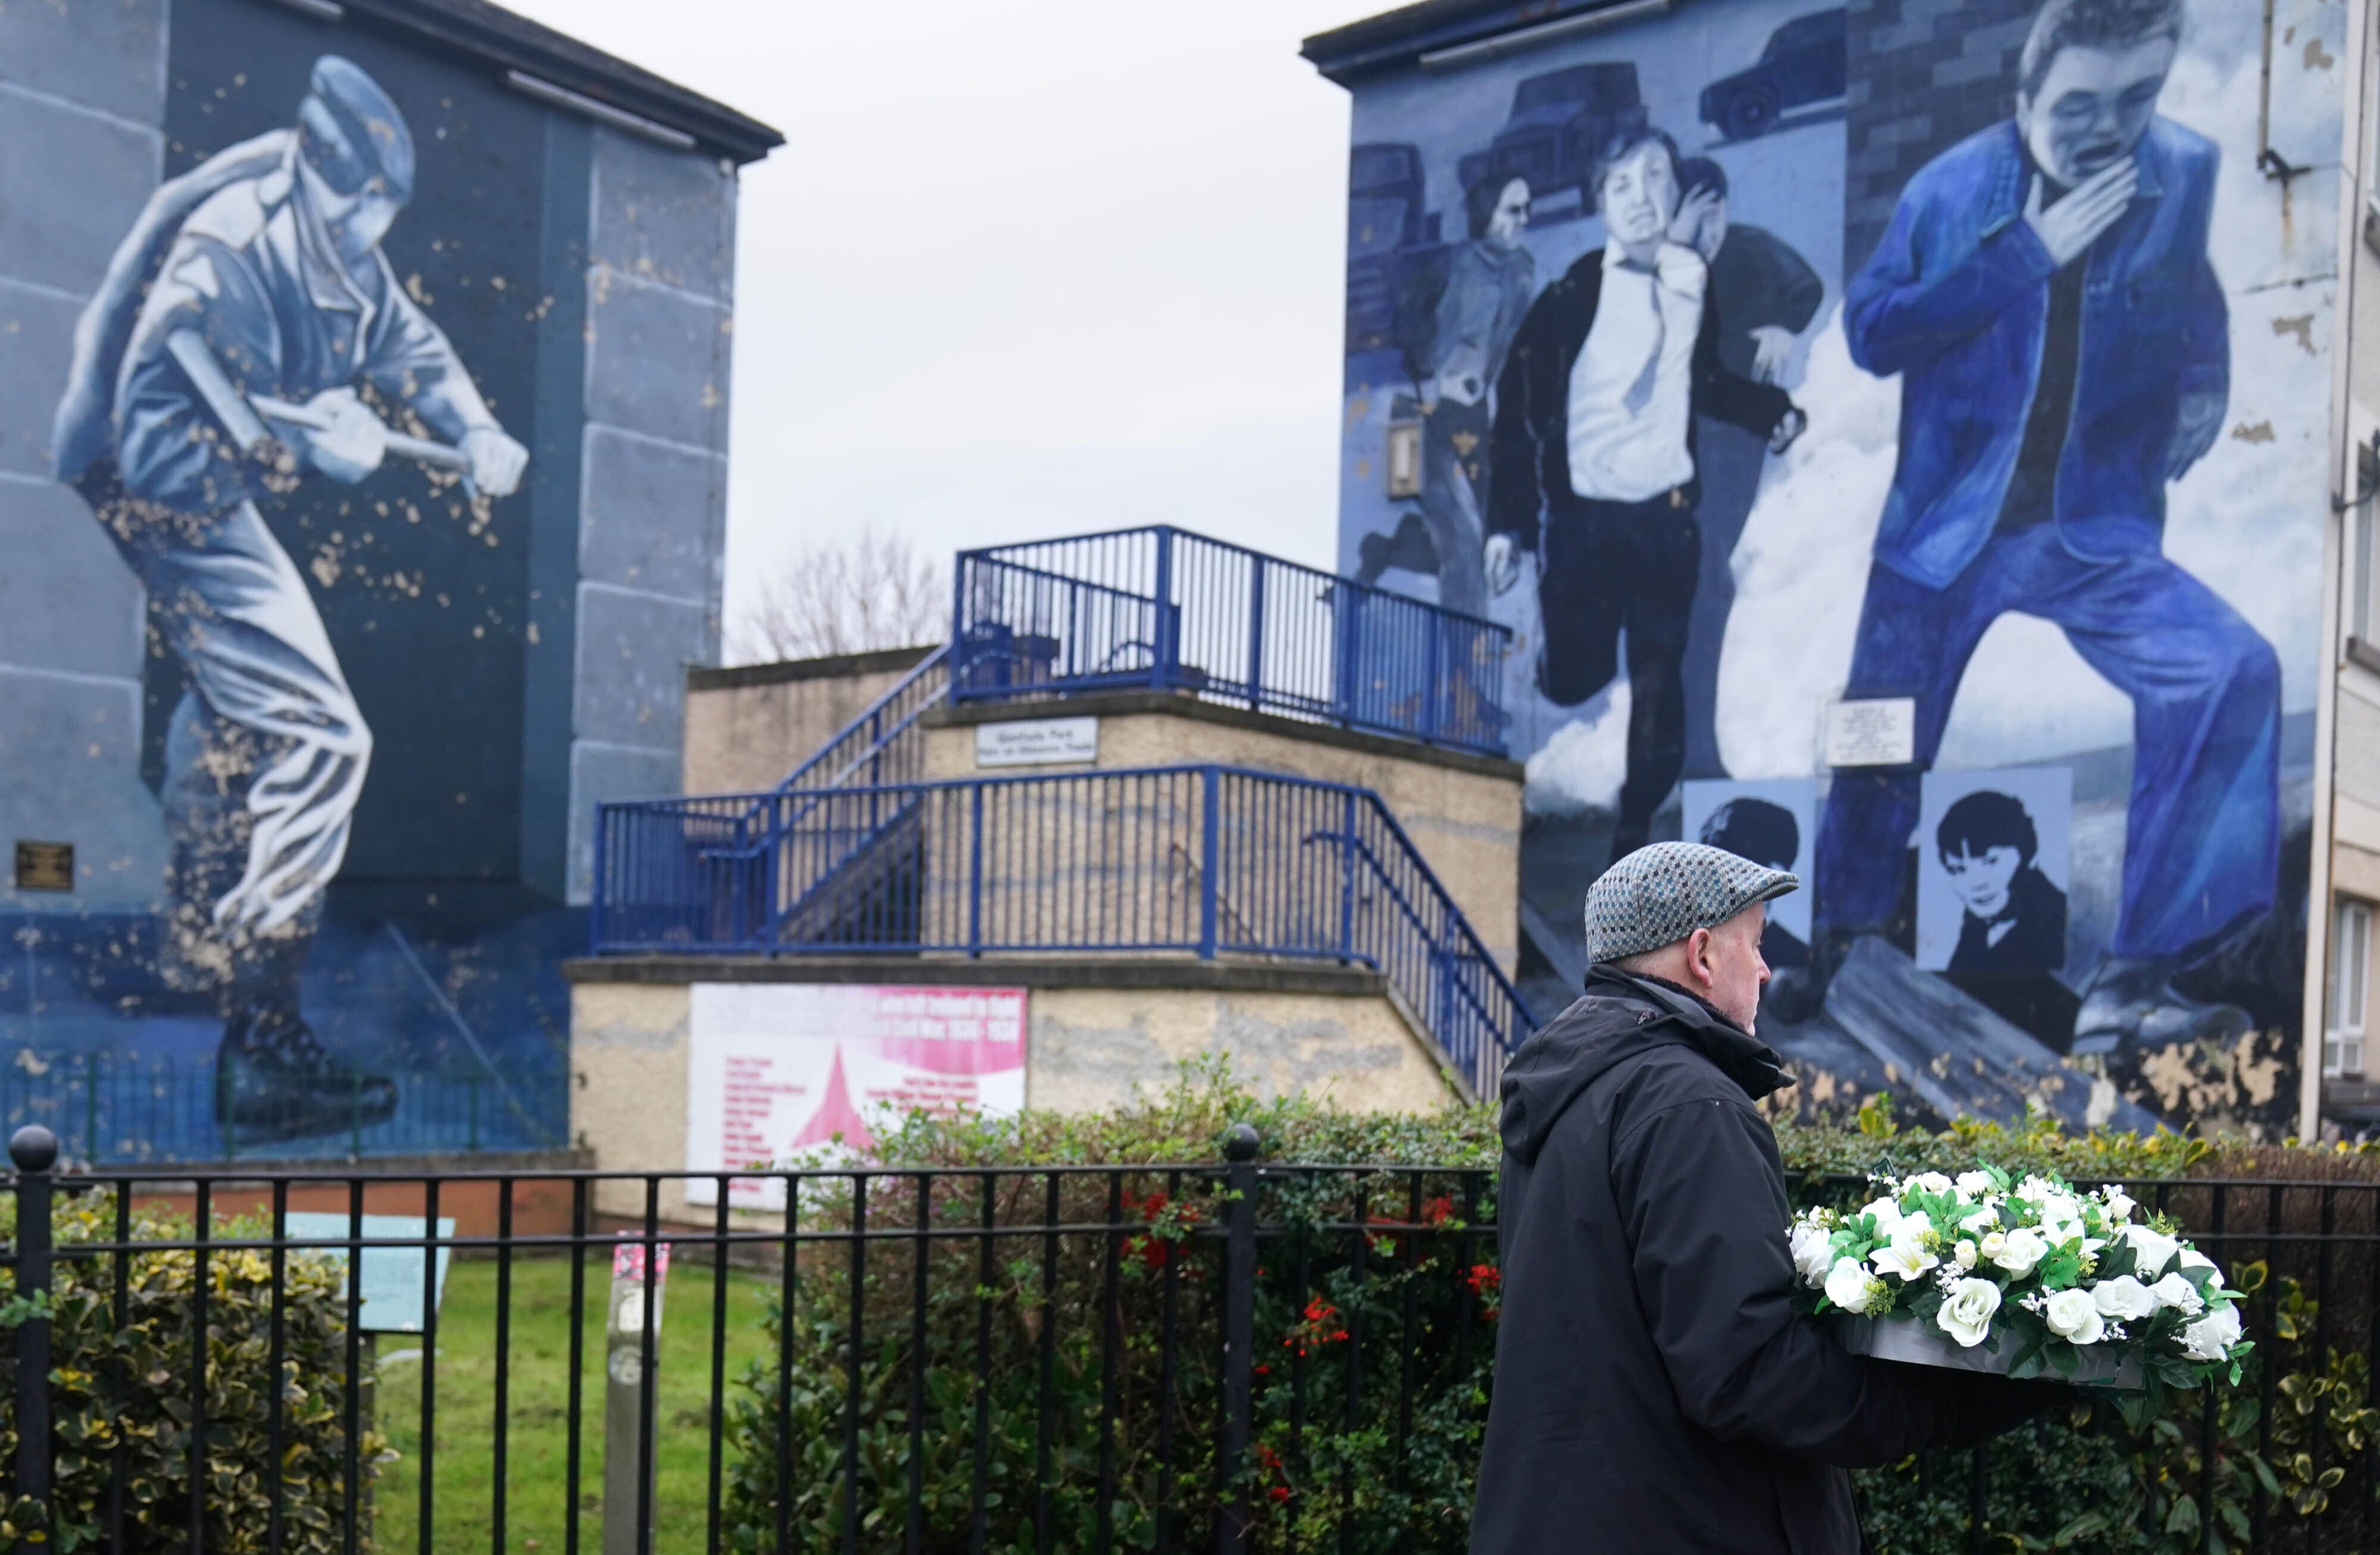 A man with flowers at the Bloody Sunday memorial in Derry (Brian Lawless/PA)